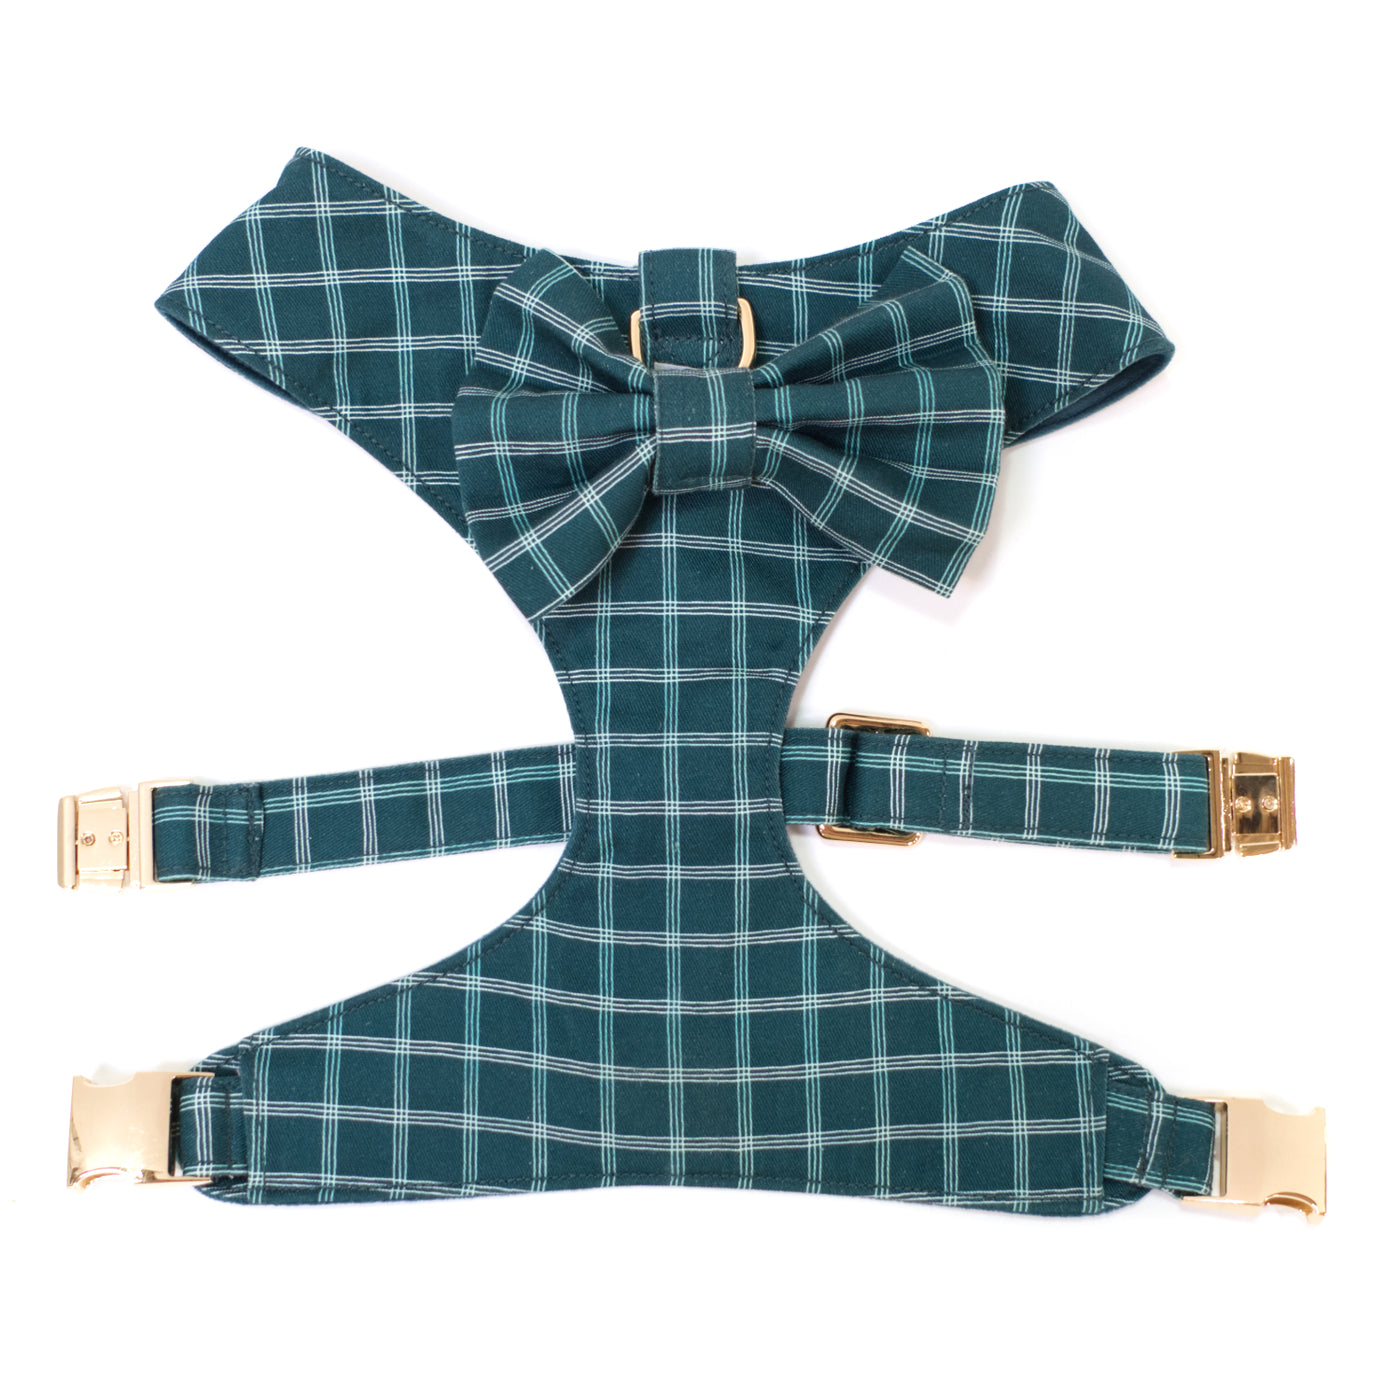 Teal windowpane plaid reversible dog harness with bow tie and gold hardware